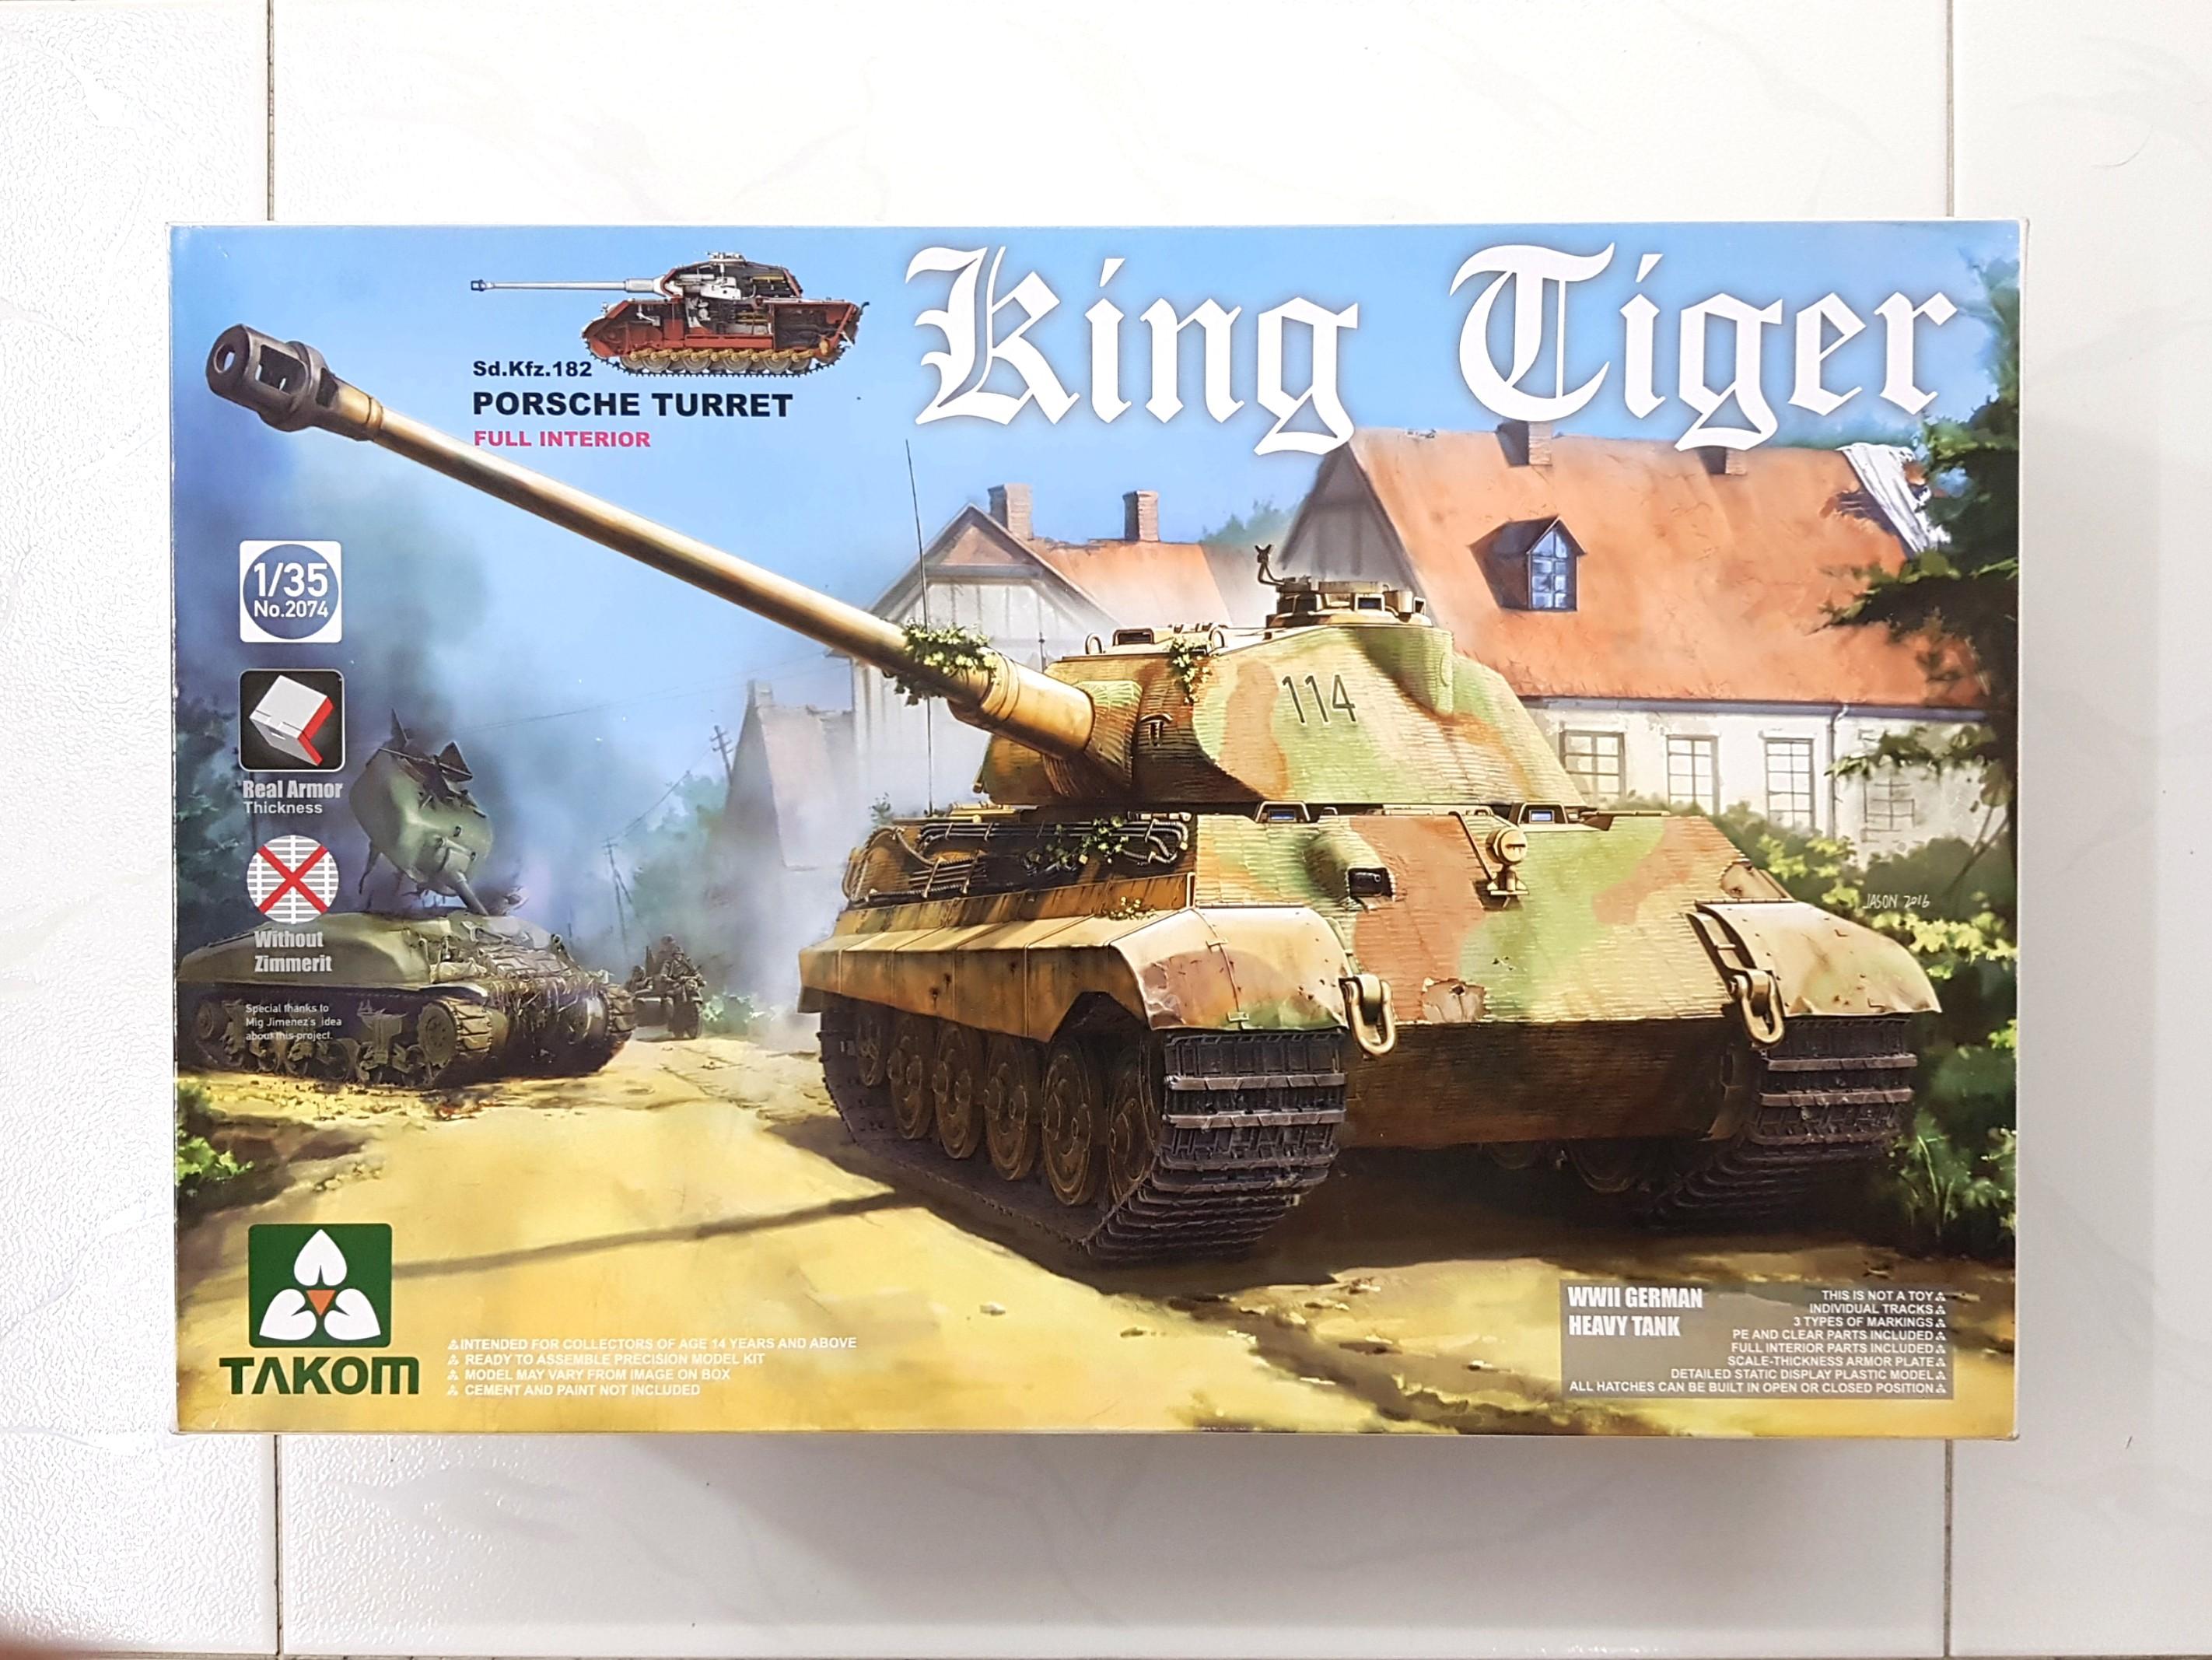 2074 Upper Hull from Kit No Takom 1/35th Scale King Tiger Porsche Turret 